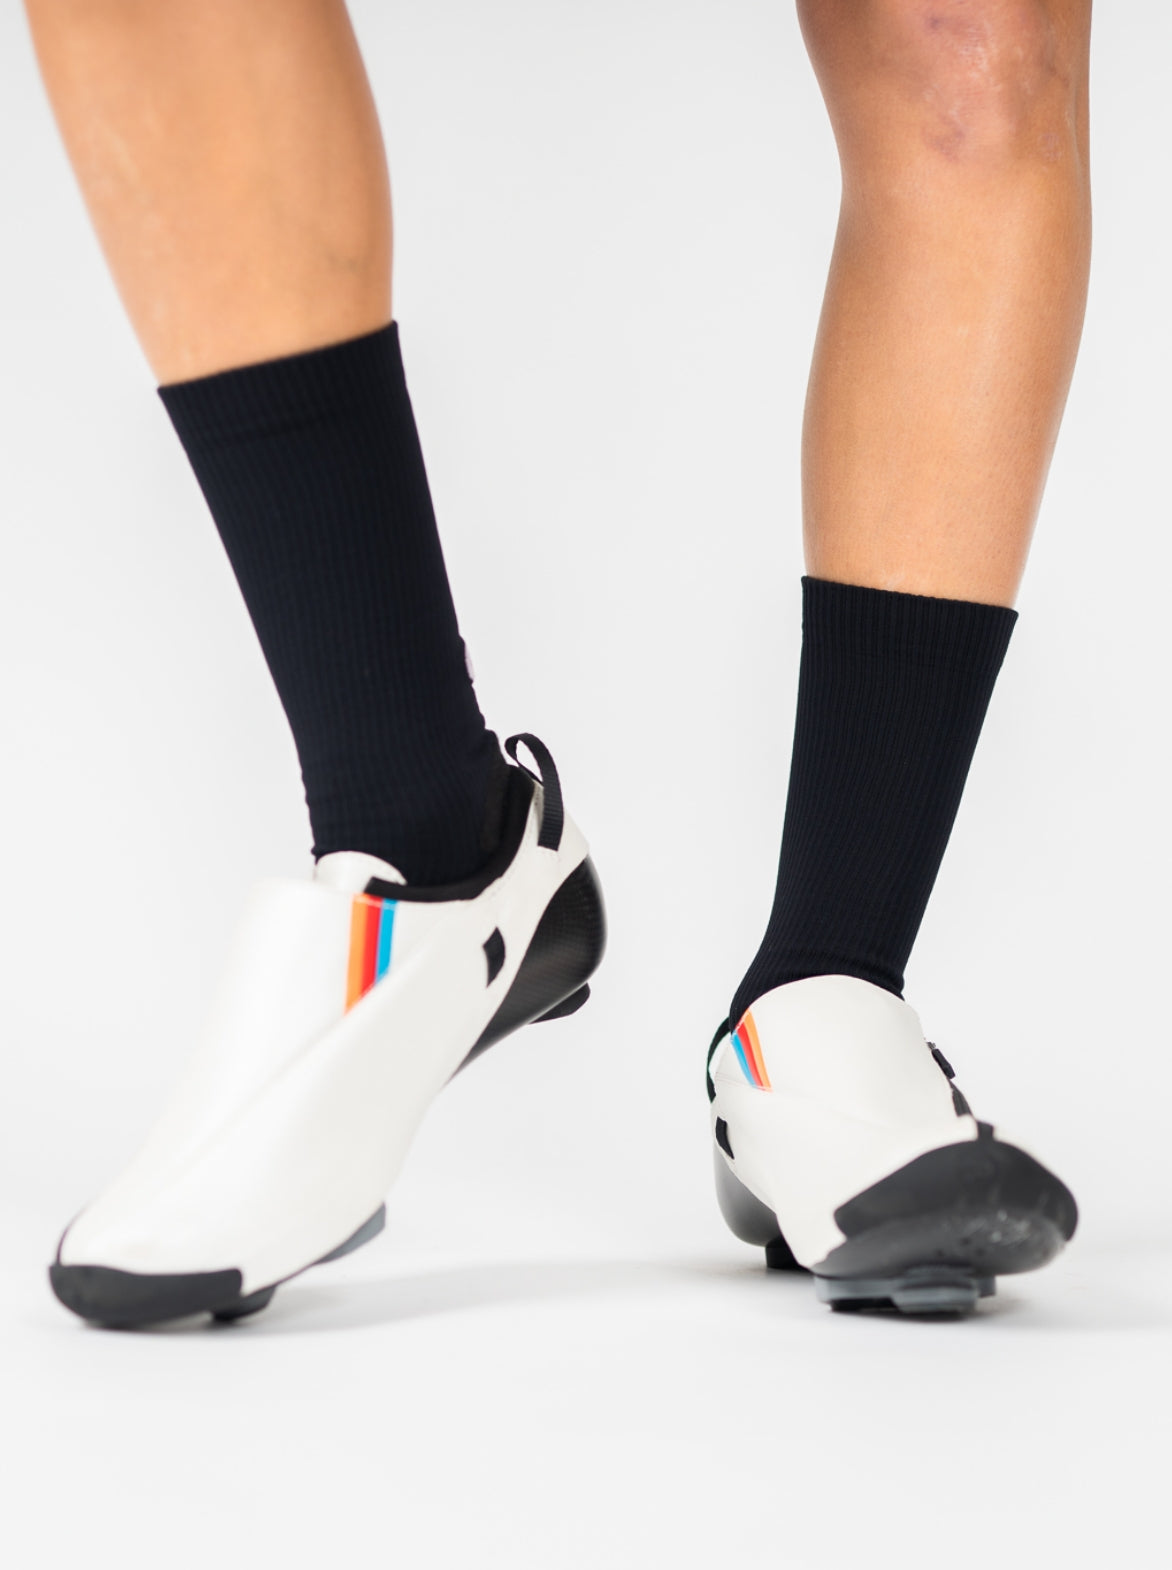 Chaussettes Cyclisme Thermal+ Vercors